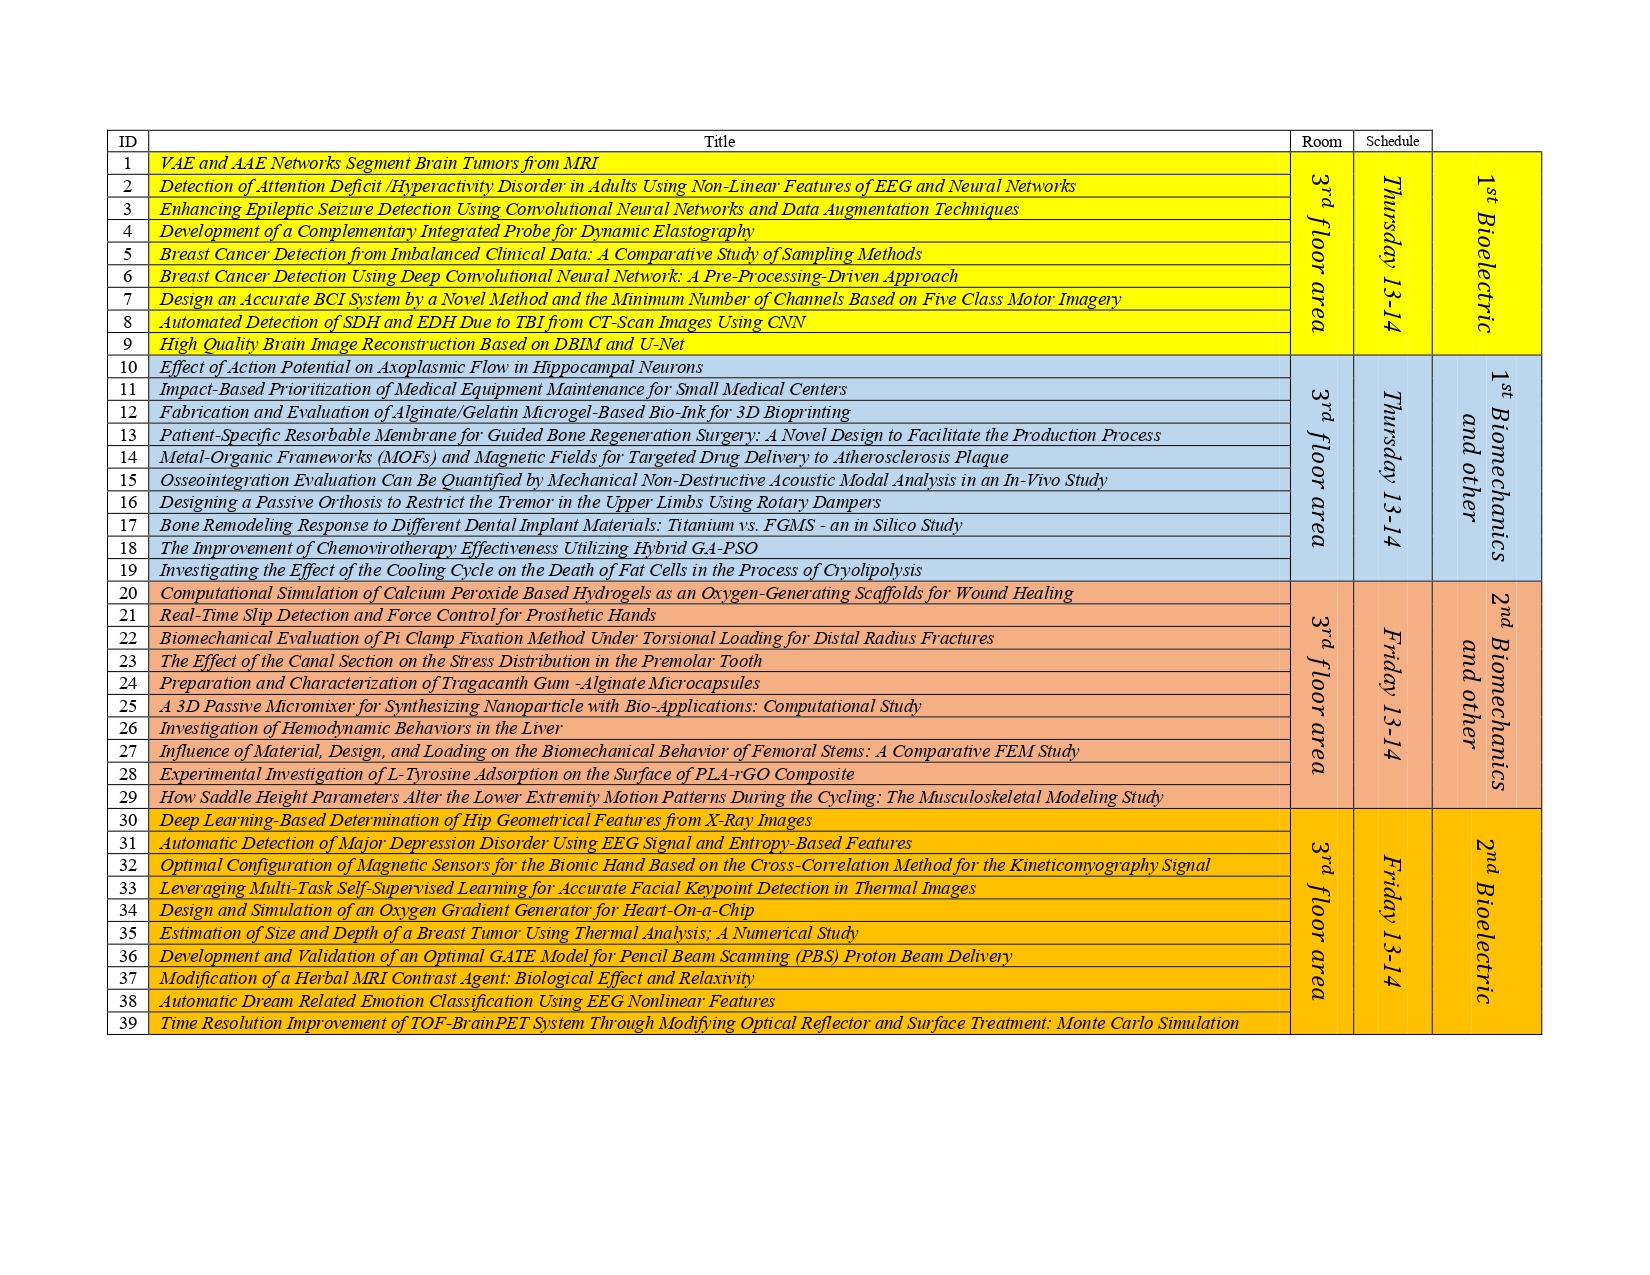 Poster Papers Presentation Timetable